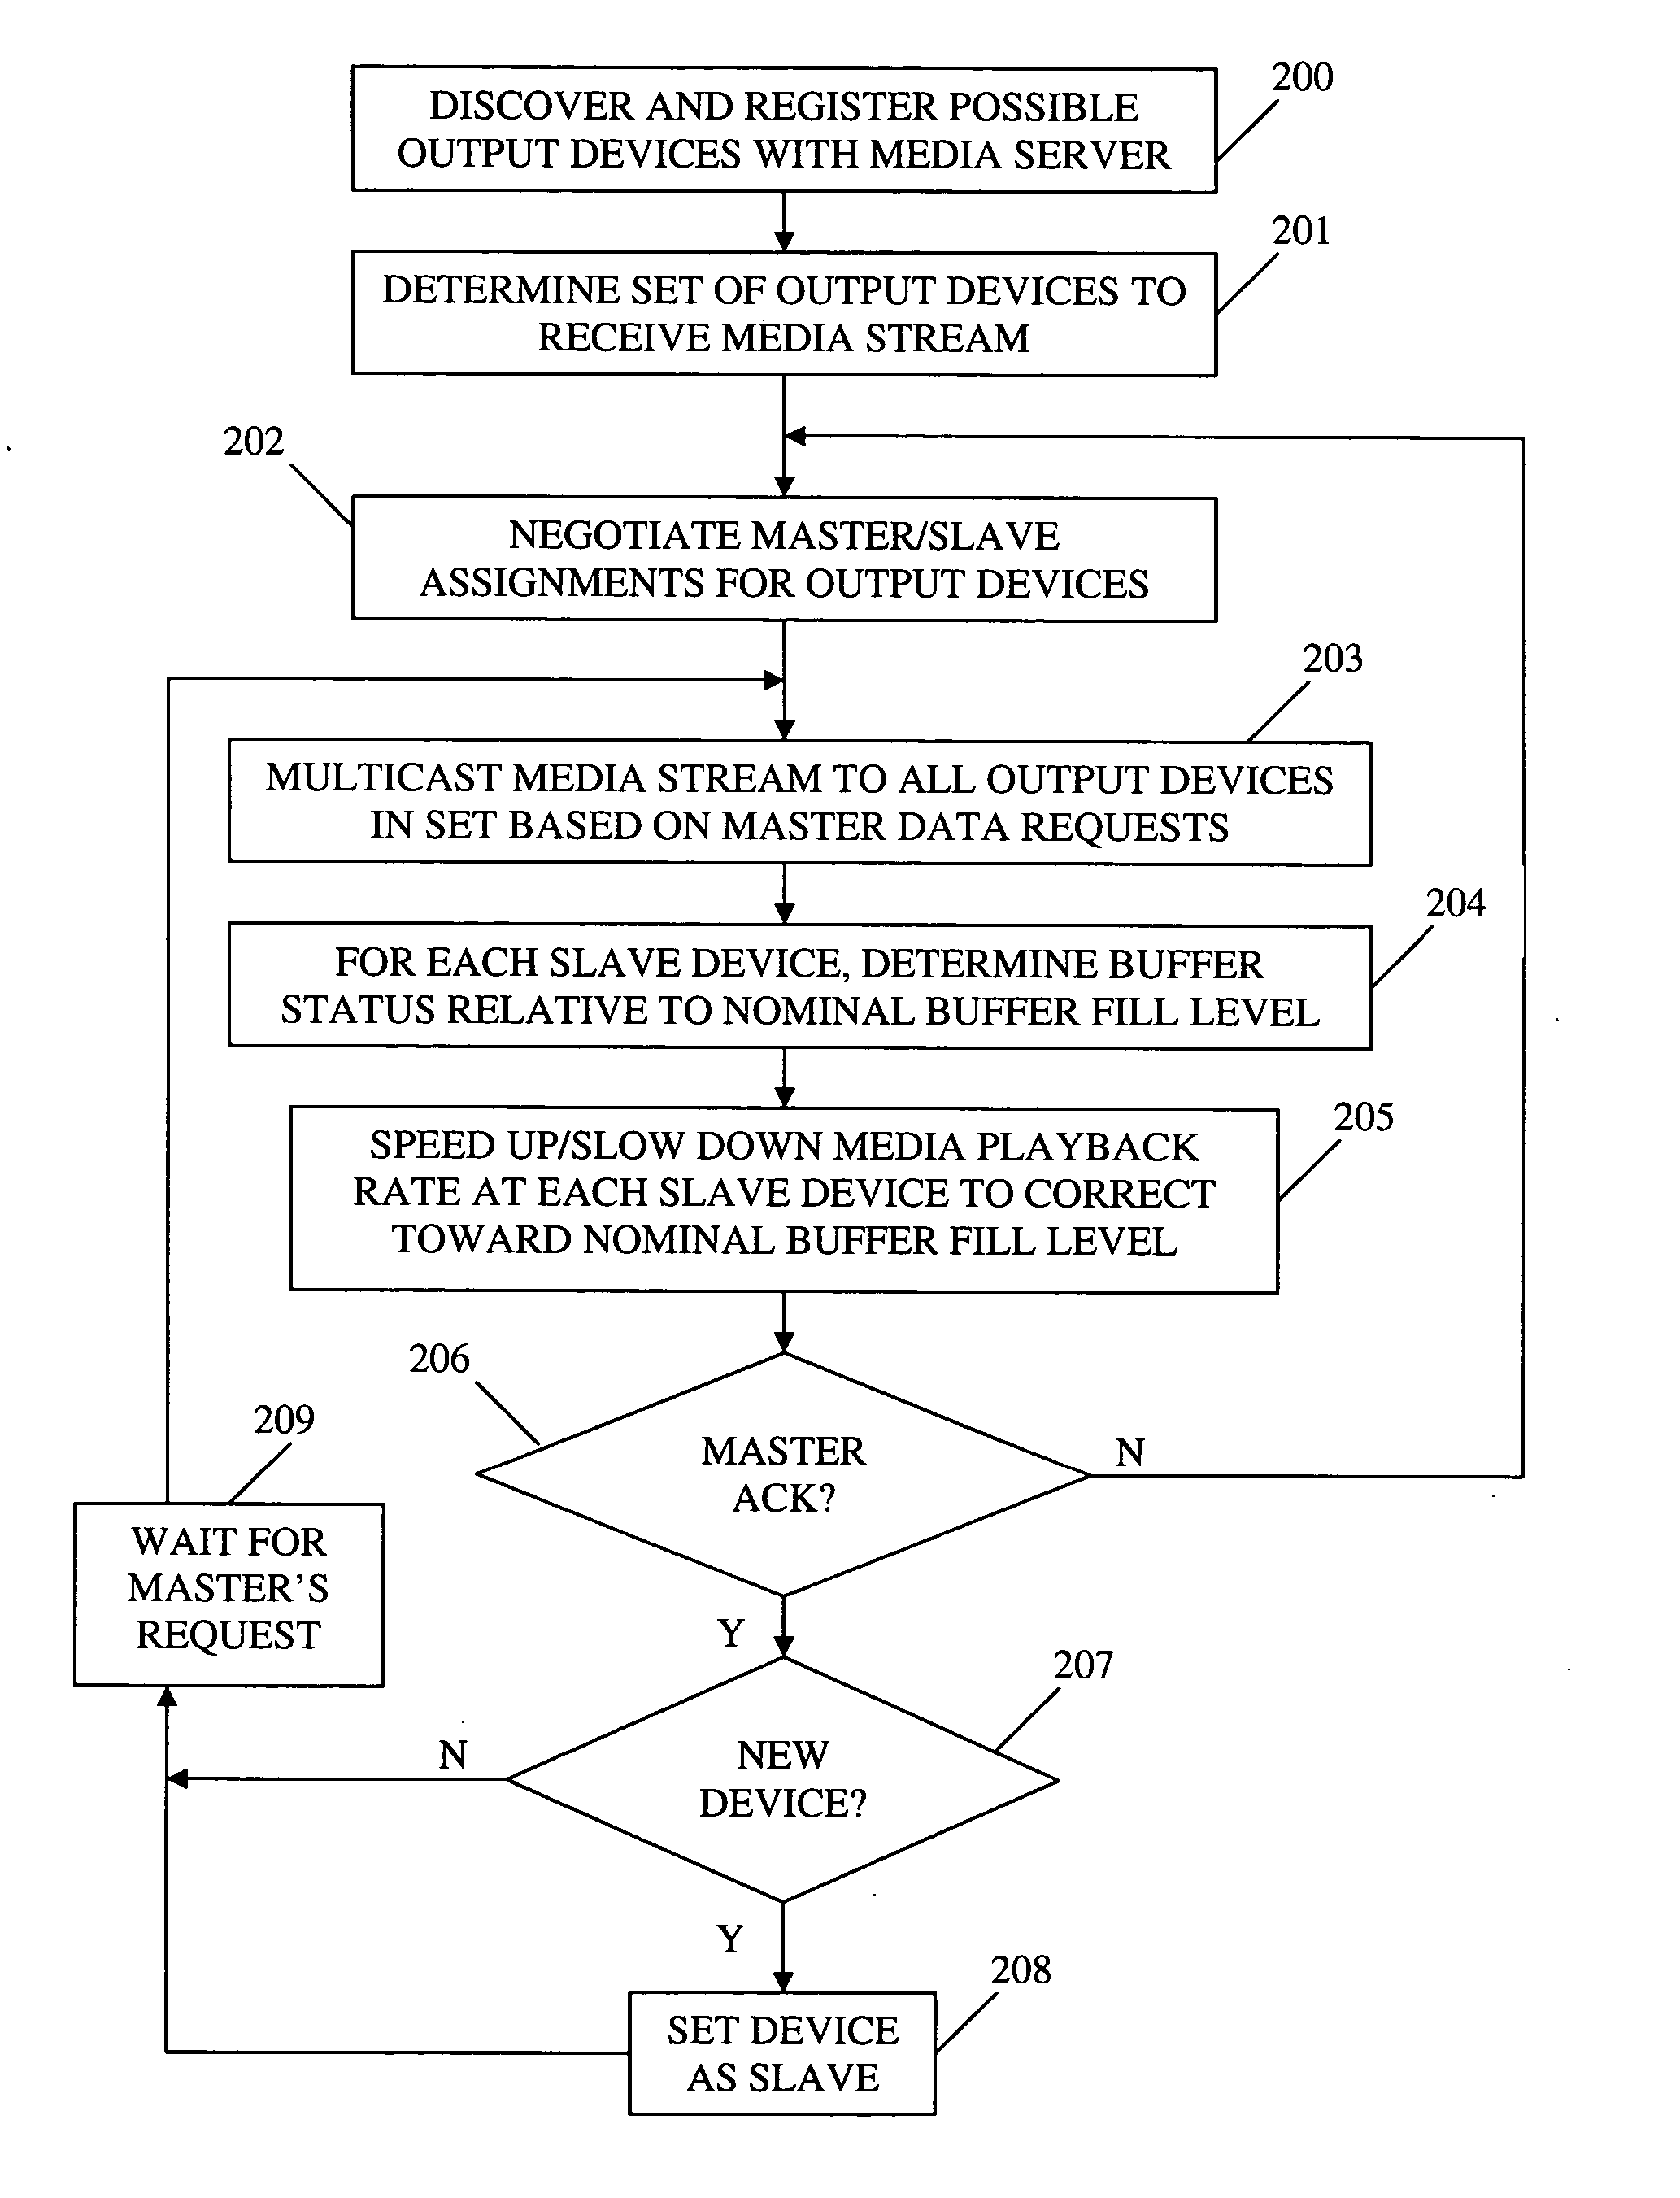 Method and apparatus for synchronizing playback of streaming media in multiple output devices